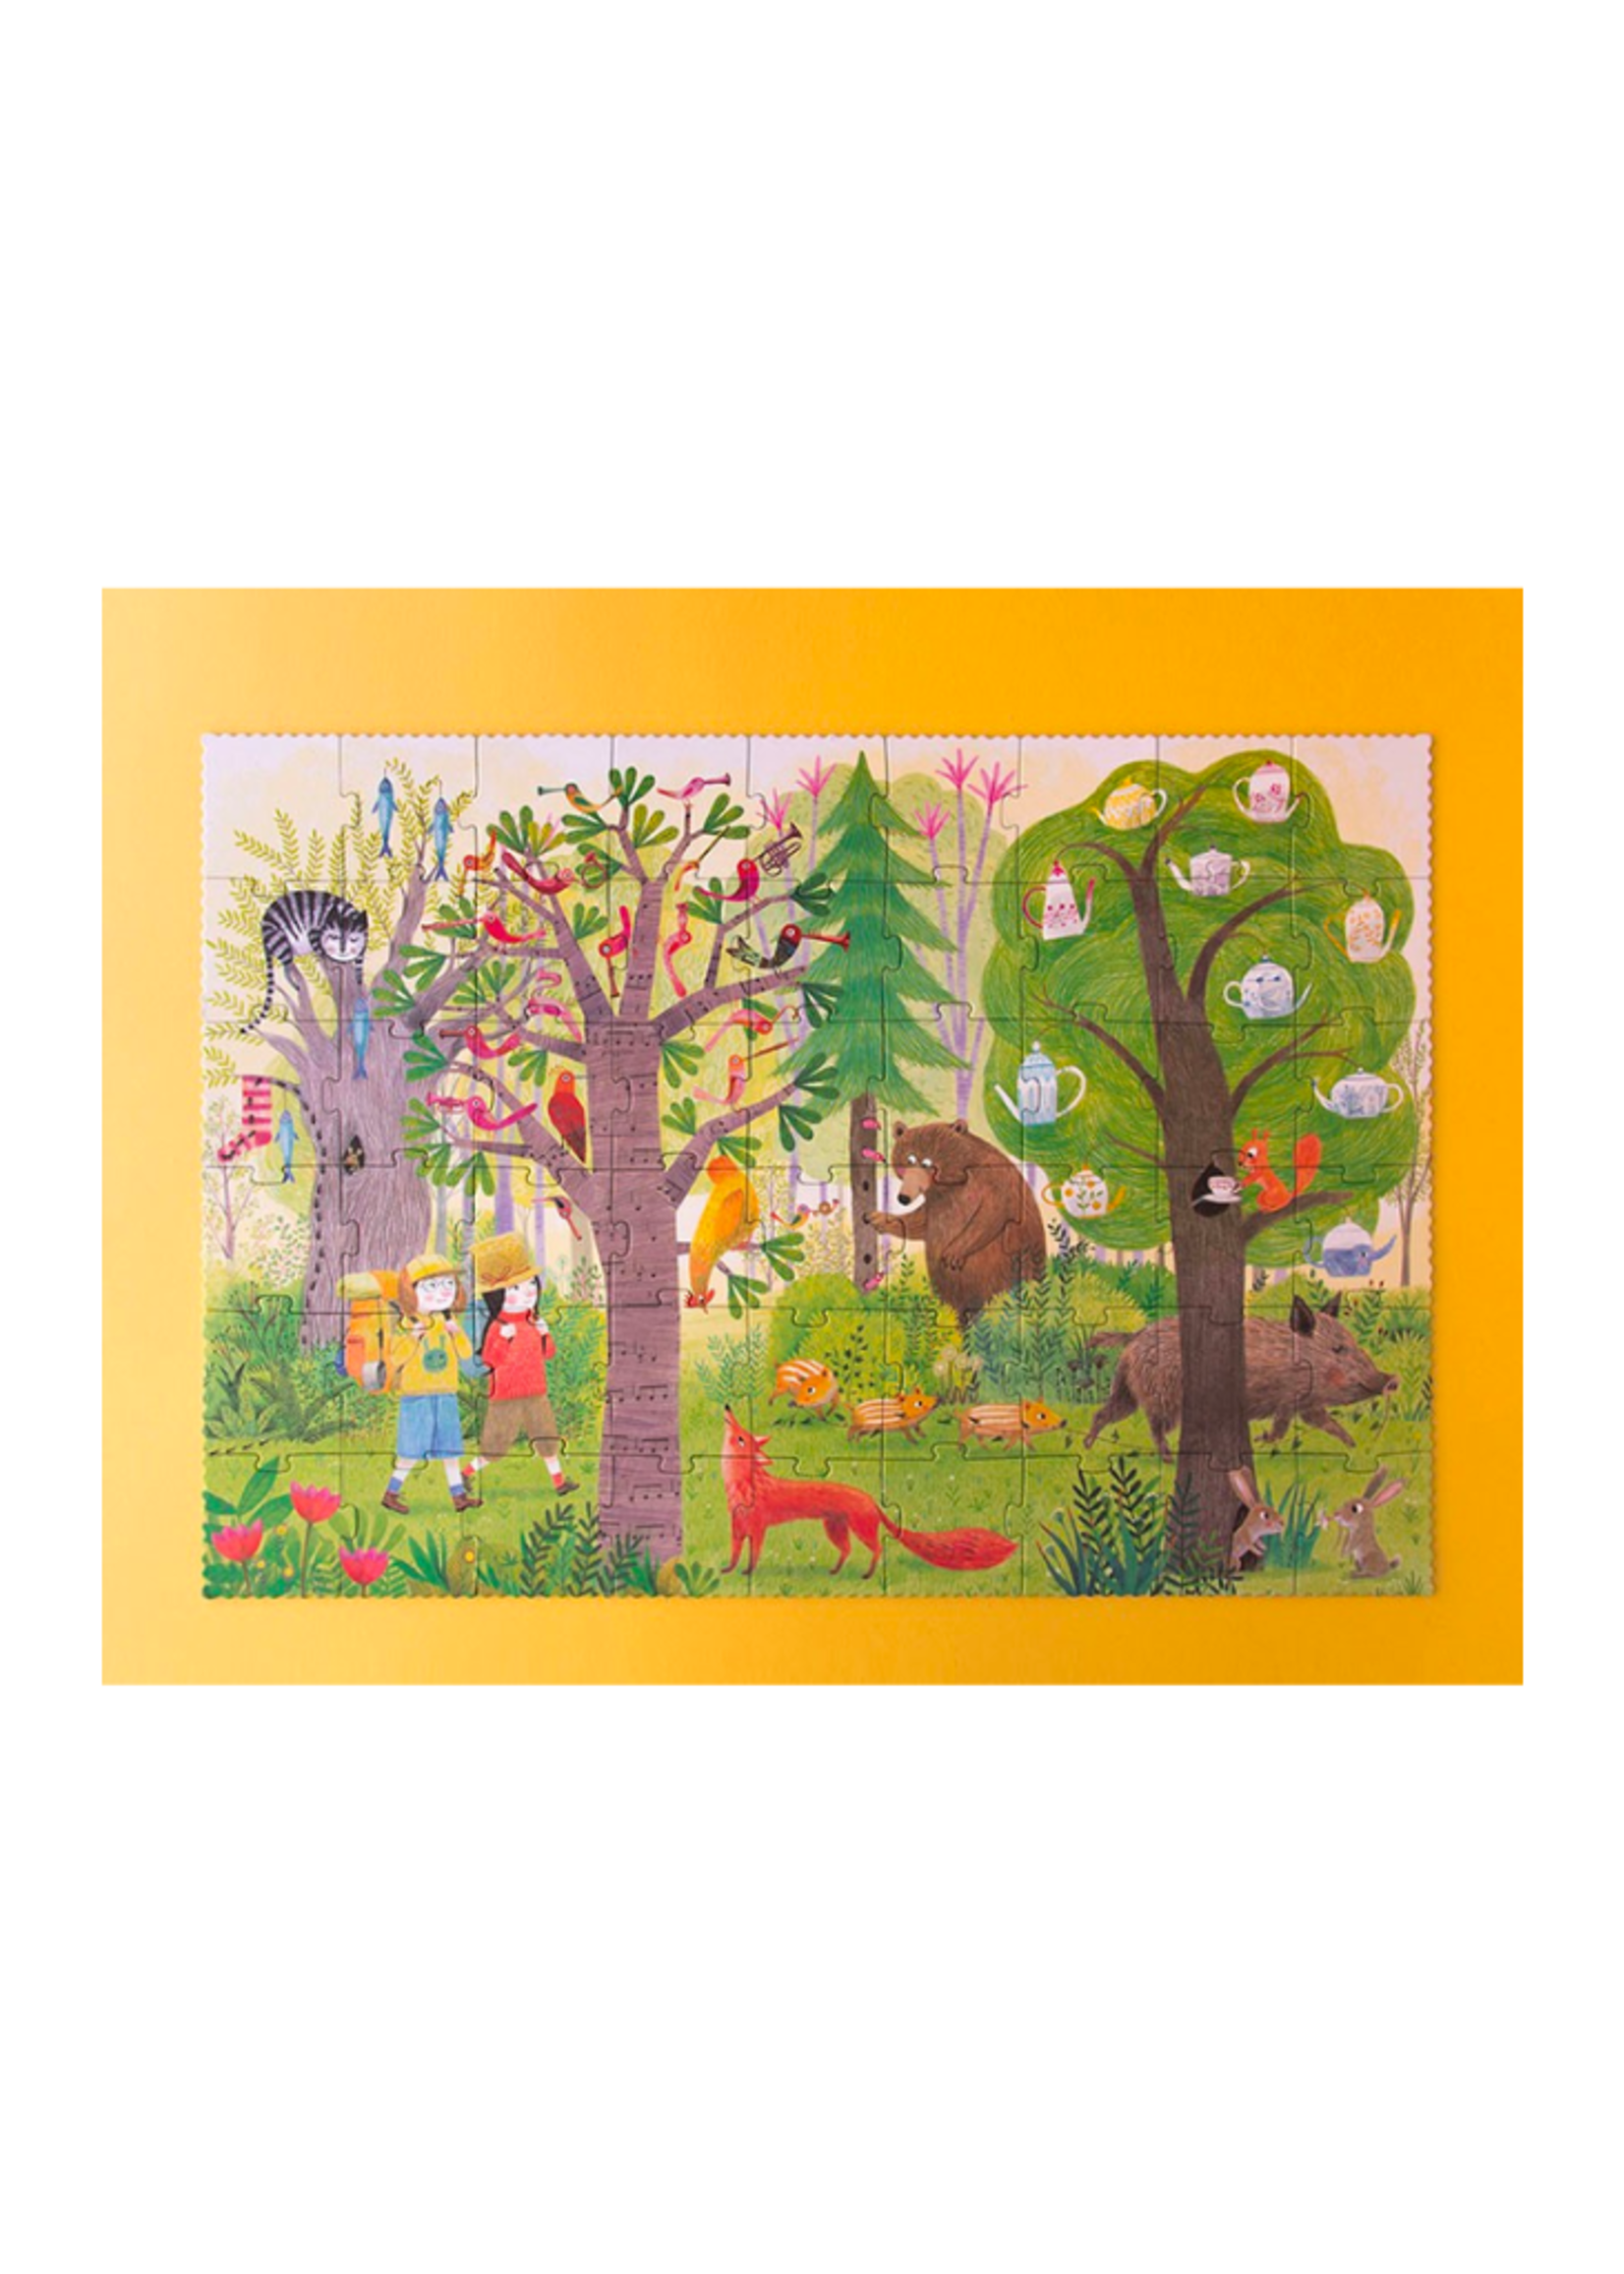 Londji Night & Day In The Forest Reversible Puzzle - 54 Pieces